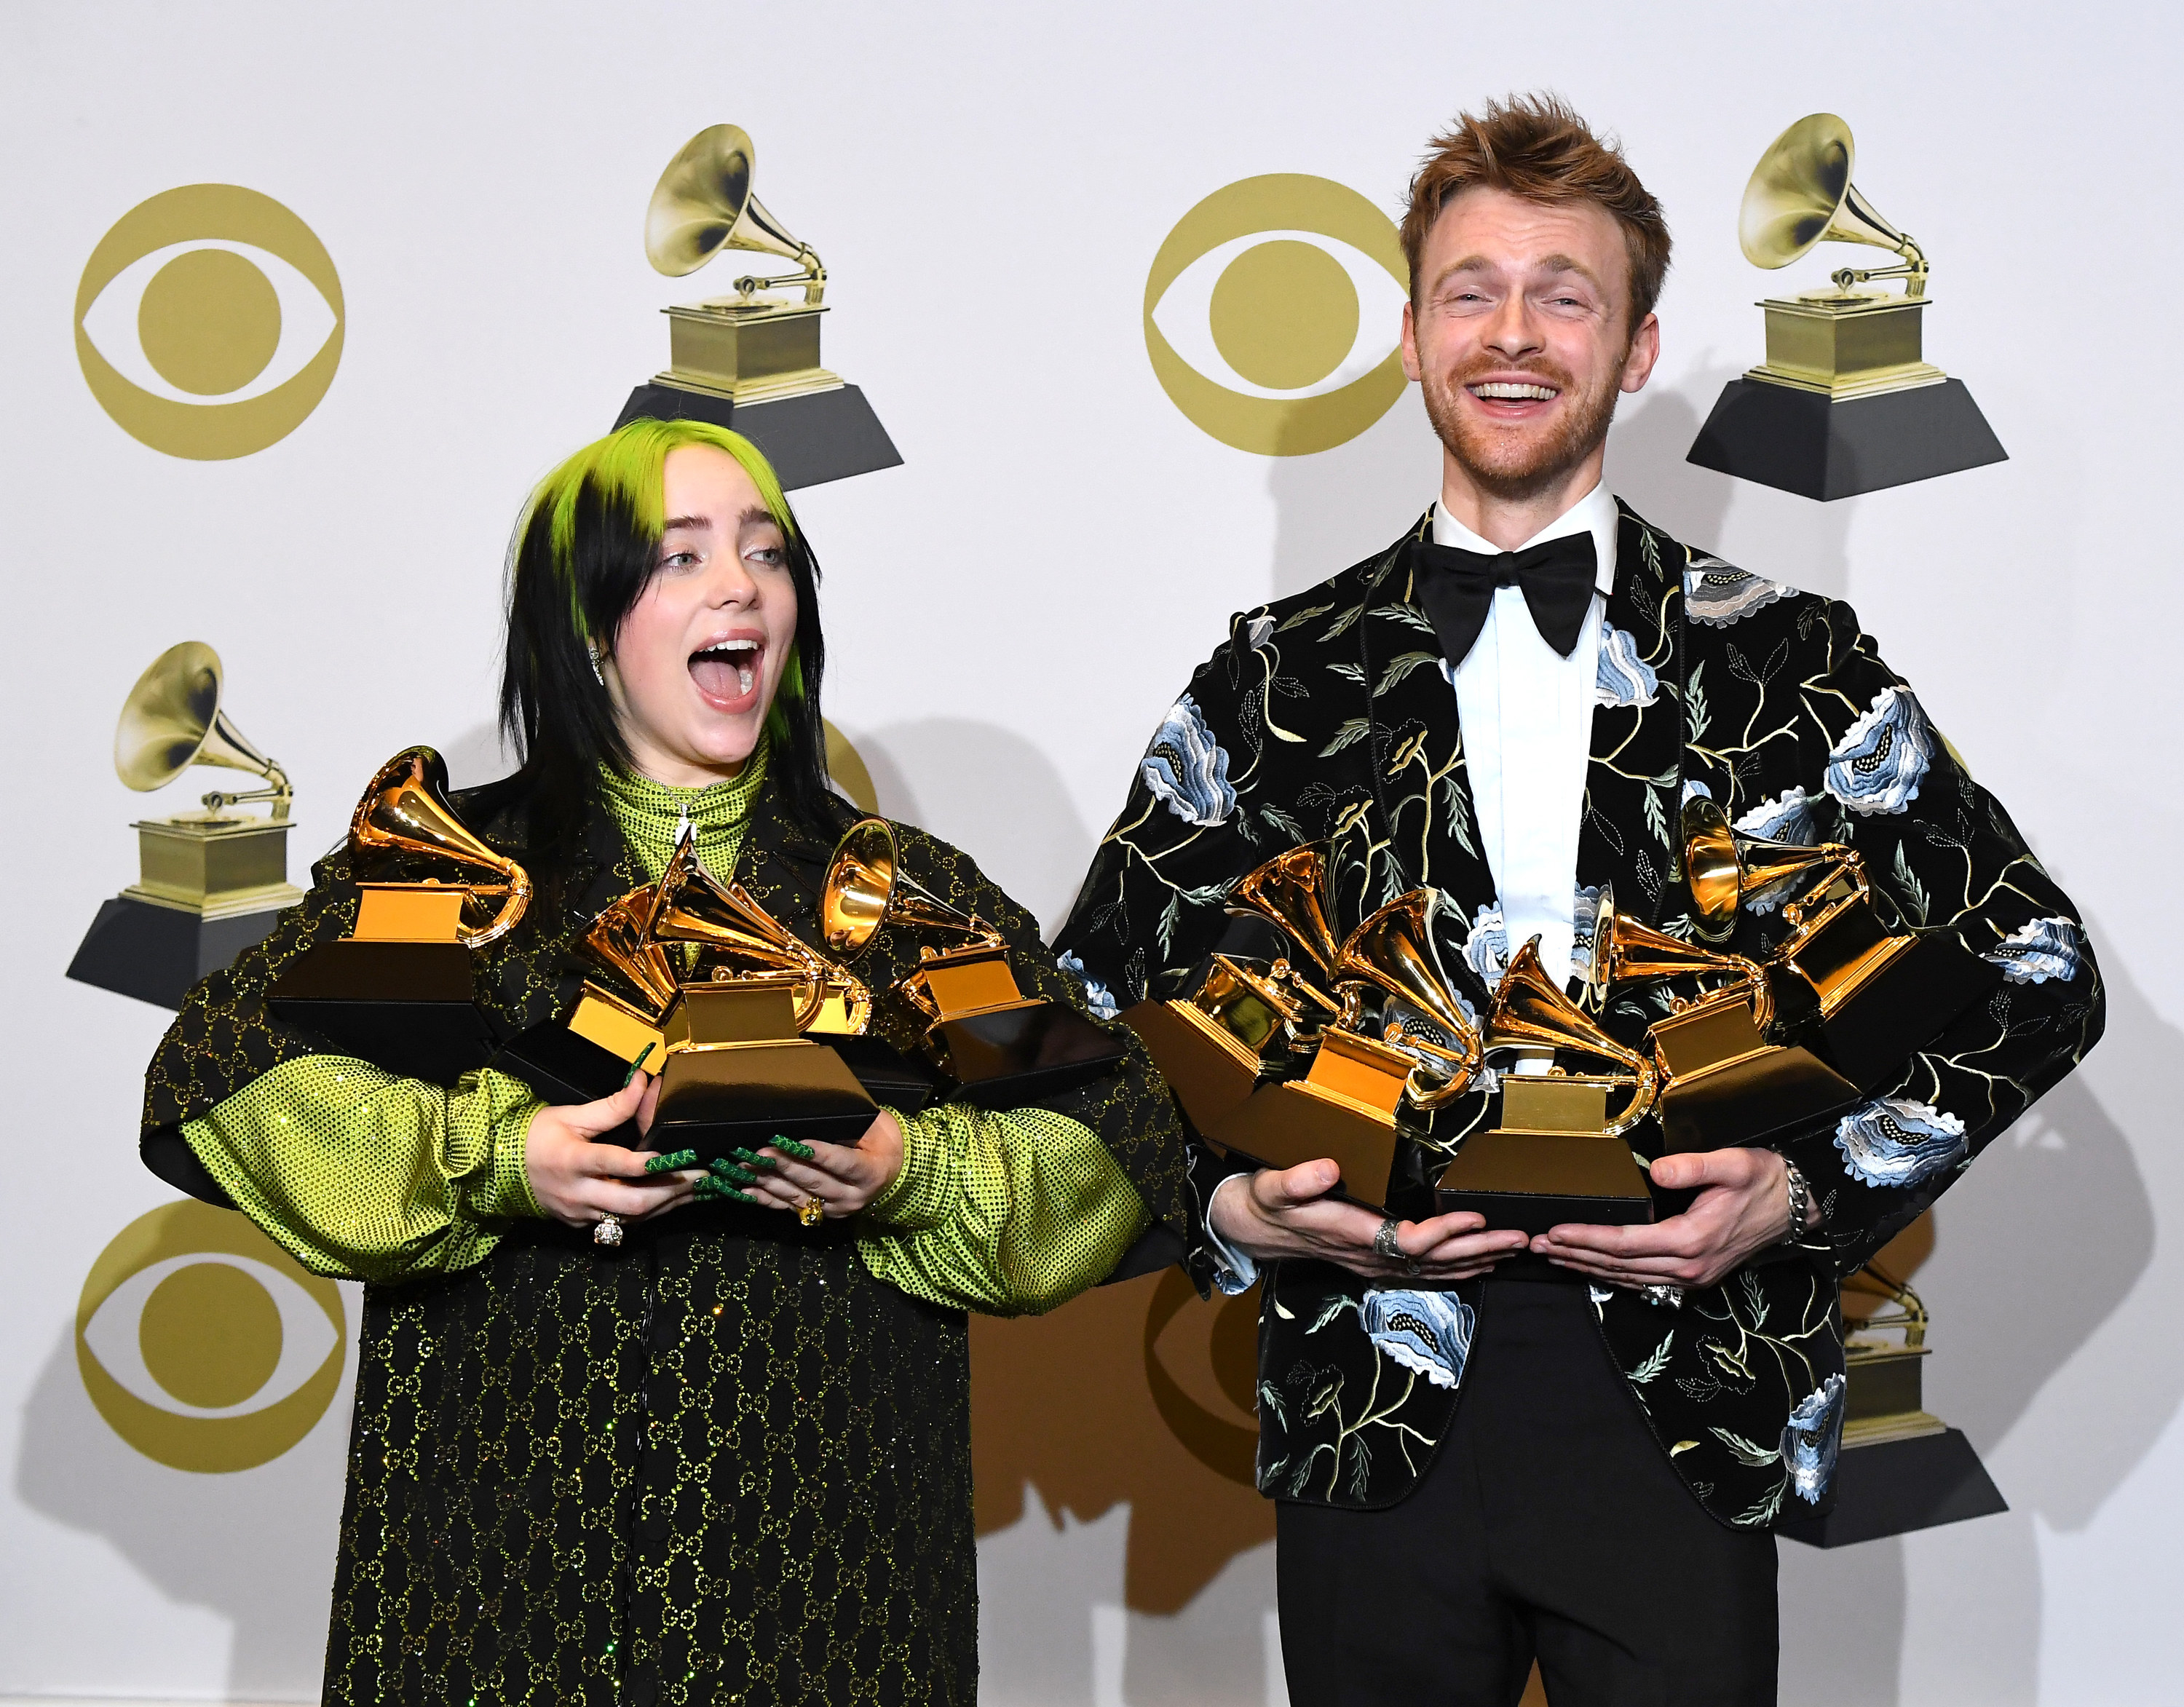 Billie and her brother and collaborator carrying their boatload of Grammys